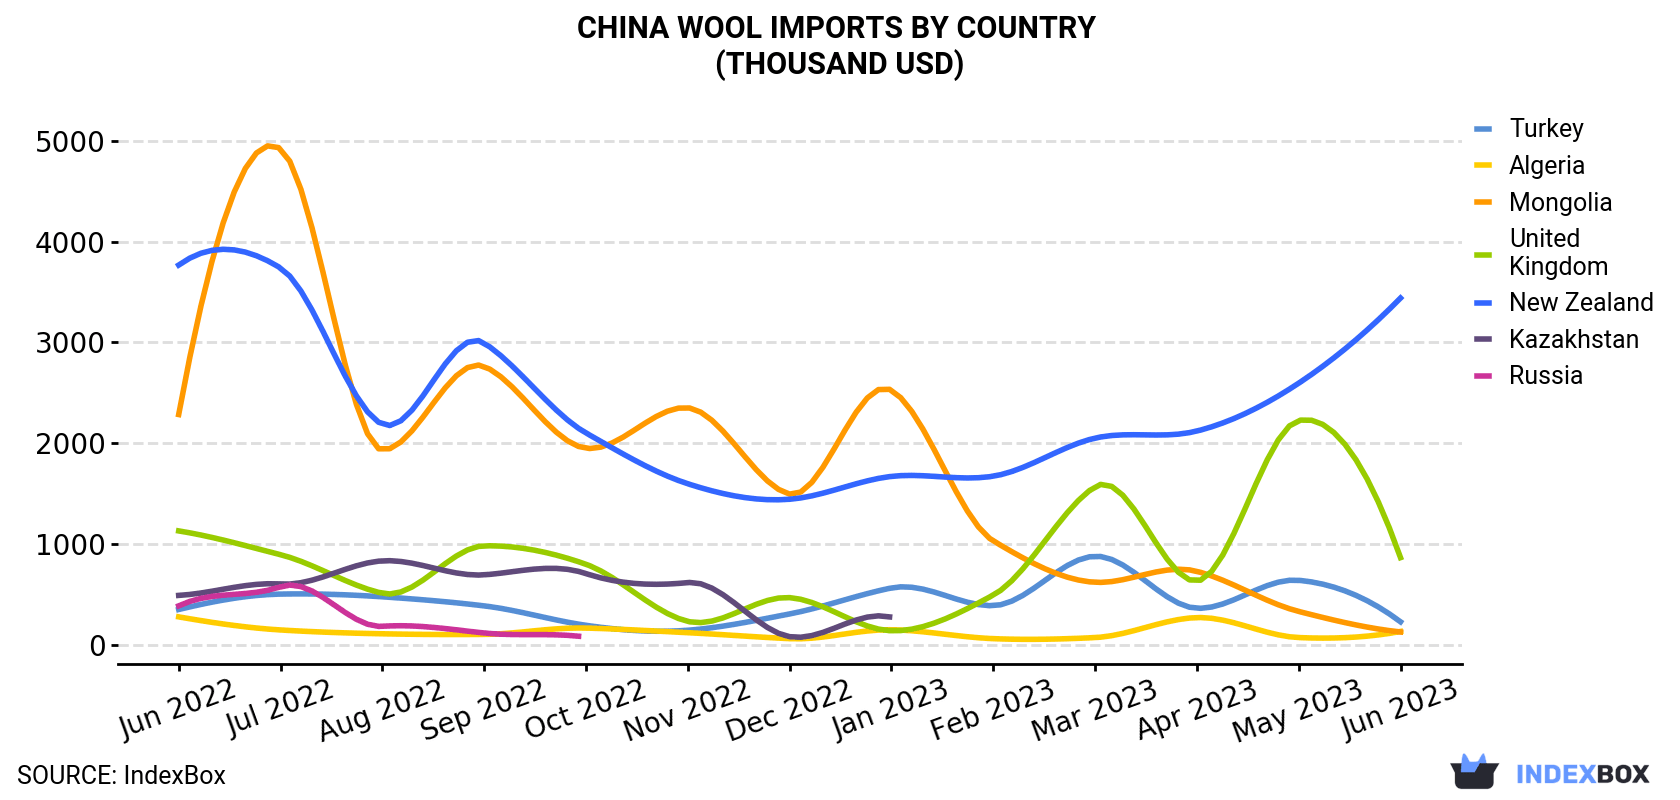 China Wool Imports By Country (Thousand USD)